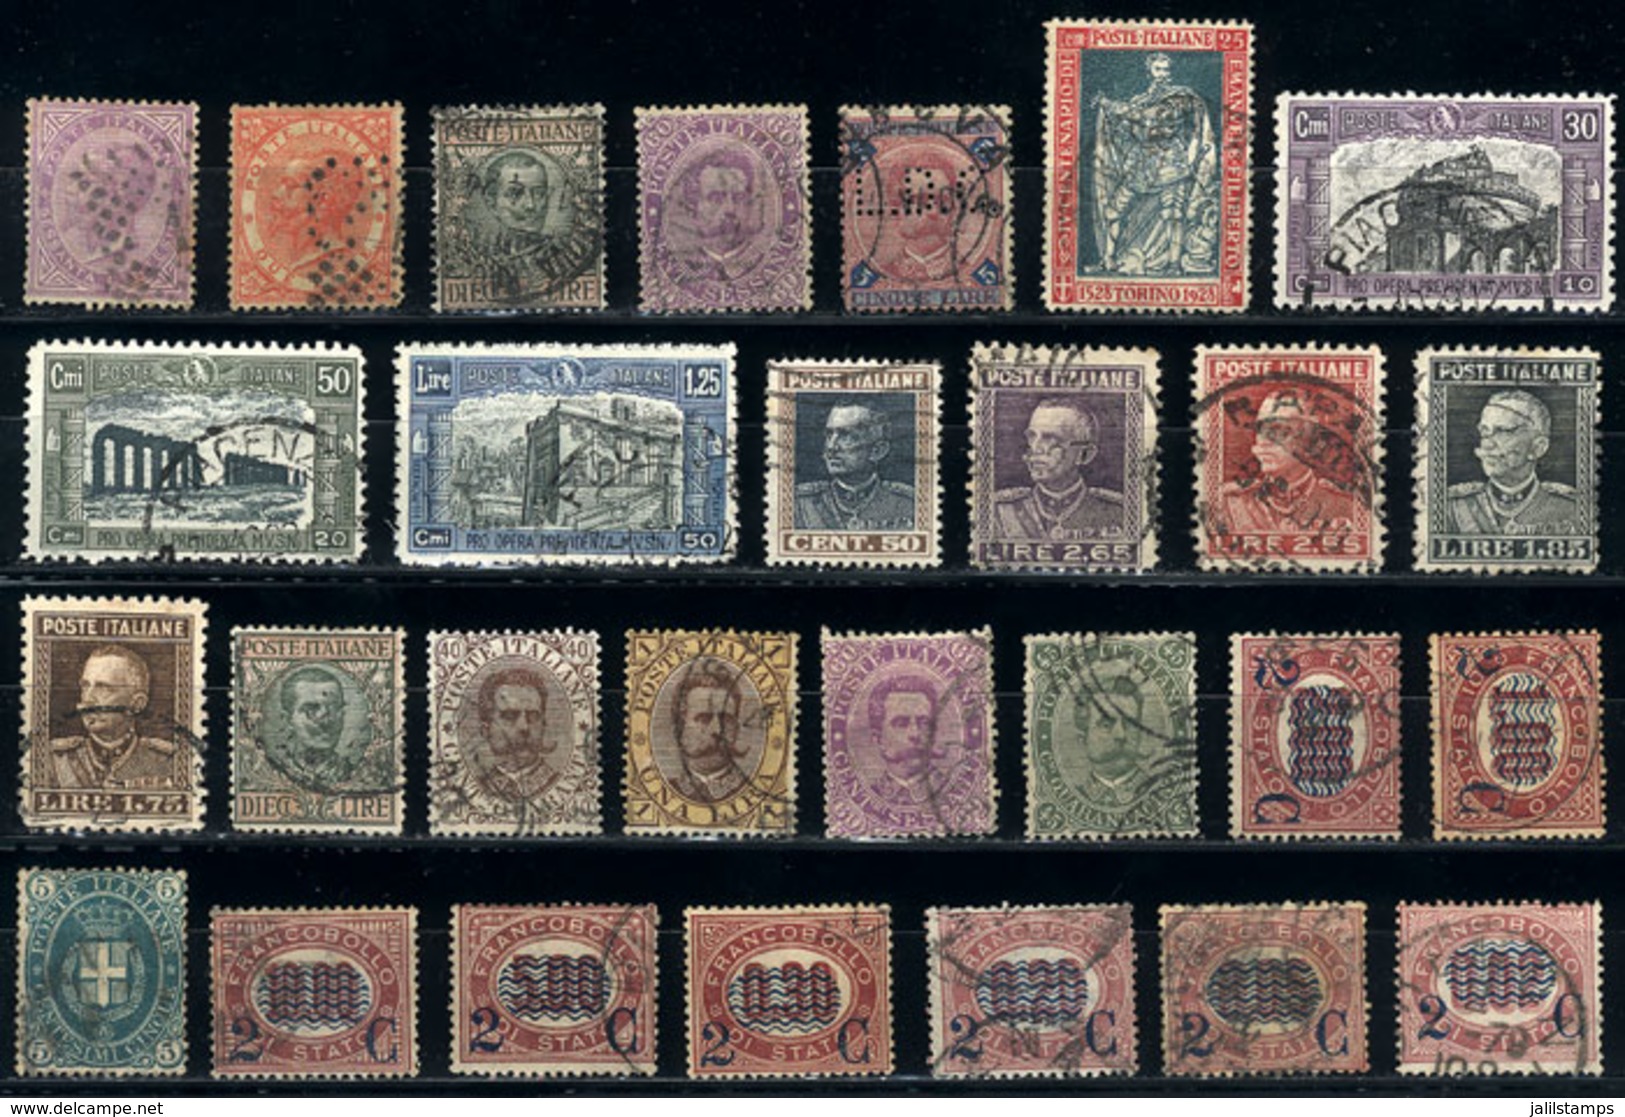 ITALY: Interesting Lot Of Old Stamps, Used, Most Of Fine To VF Quality (2 Or 3 With Minor Defects, The Rest VF!), Scott  - Unclassified